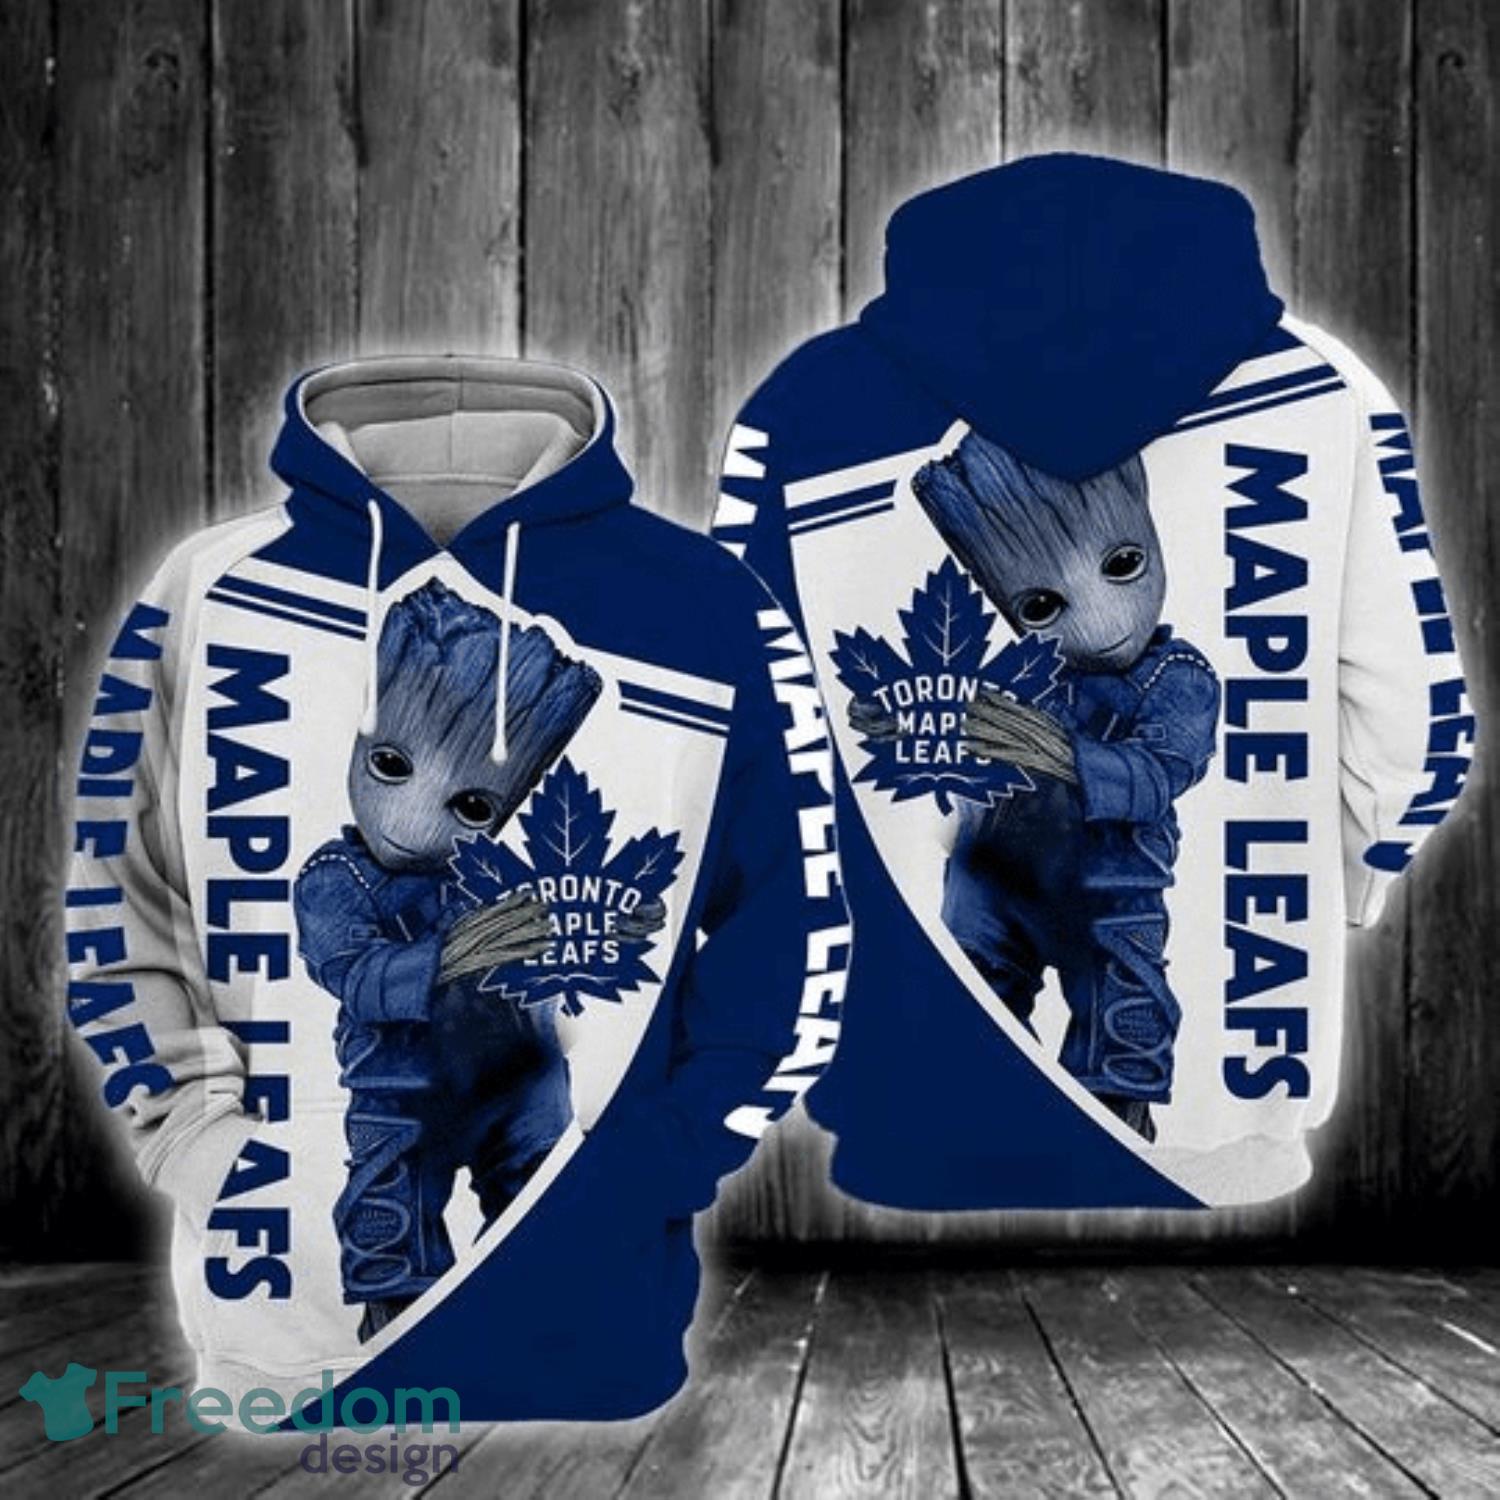 Pets First NHL Toronto Maple Leafs Tee Shirt for Dogs & Cats, X-Small. -  are You A Hockey Fan? Let Your Pet Be an NHL Fan Too!